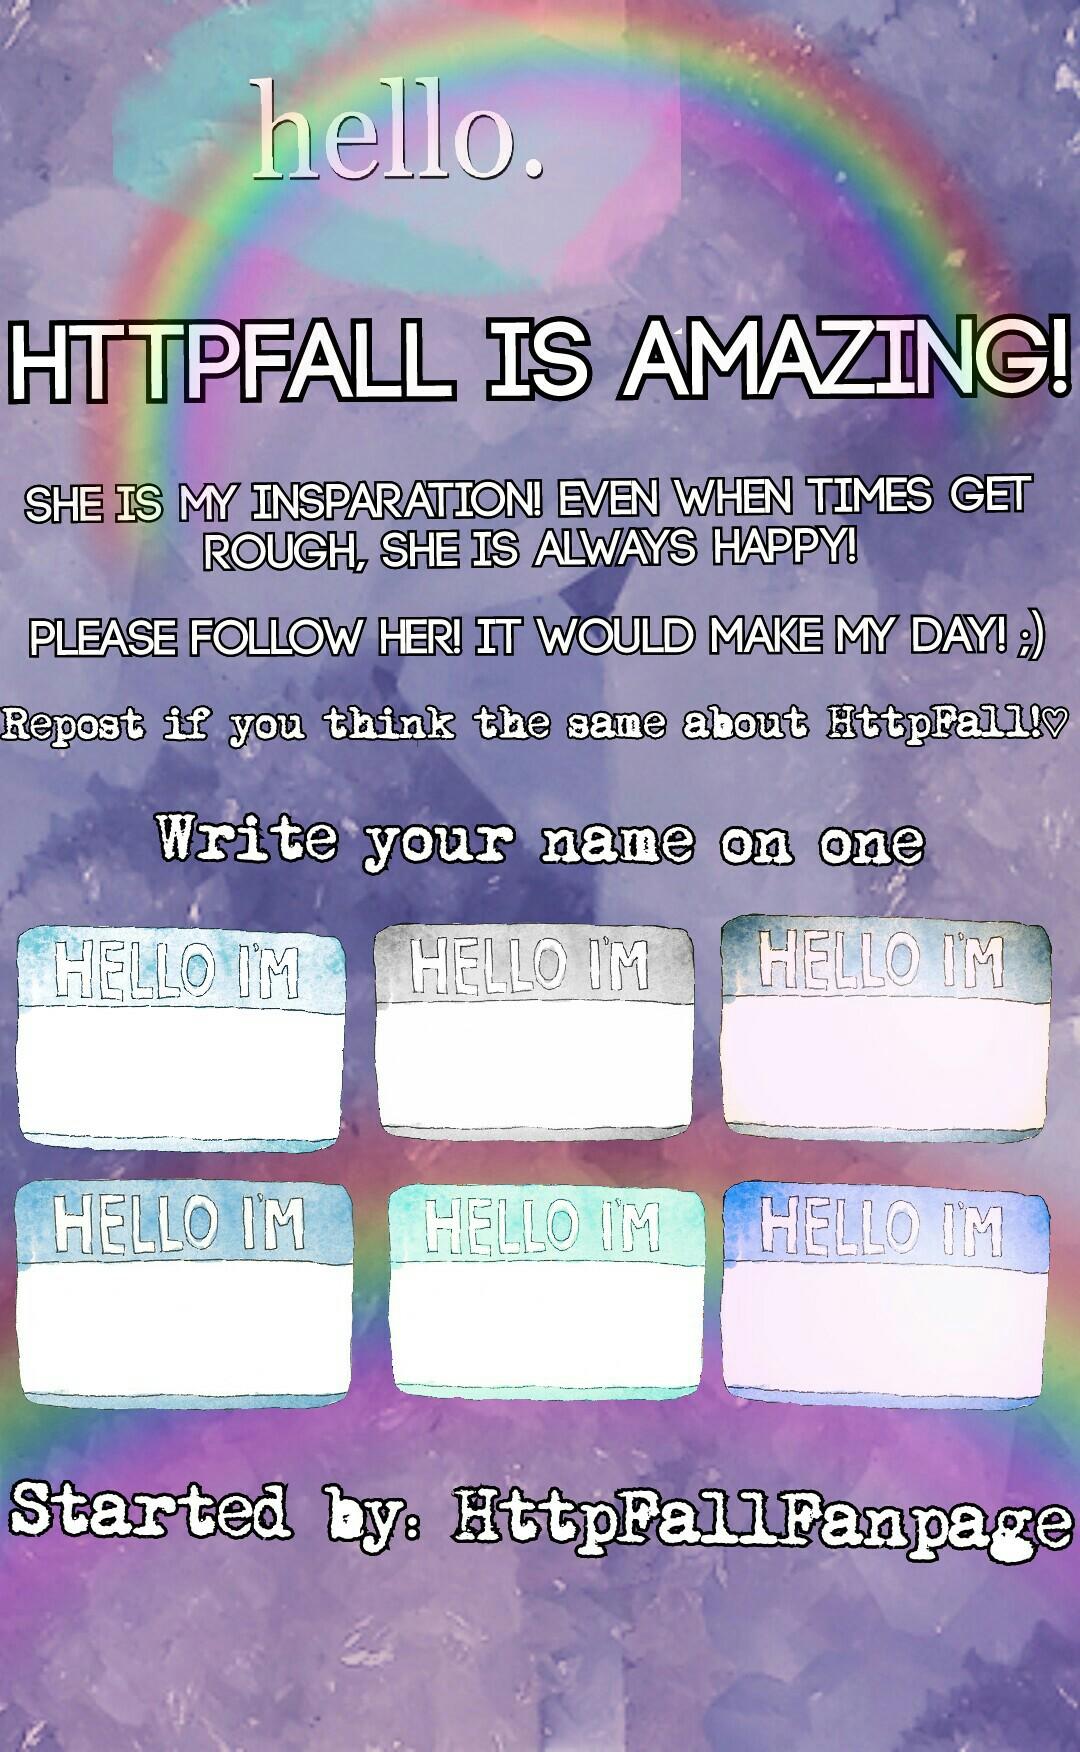 Repost if you think the same about HttpFall!♡